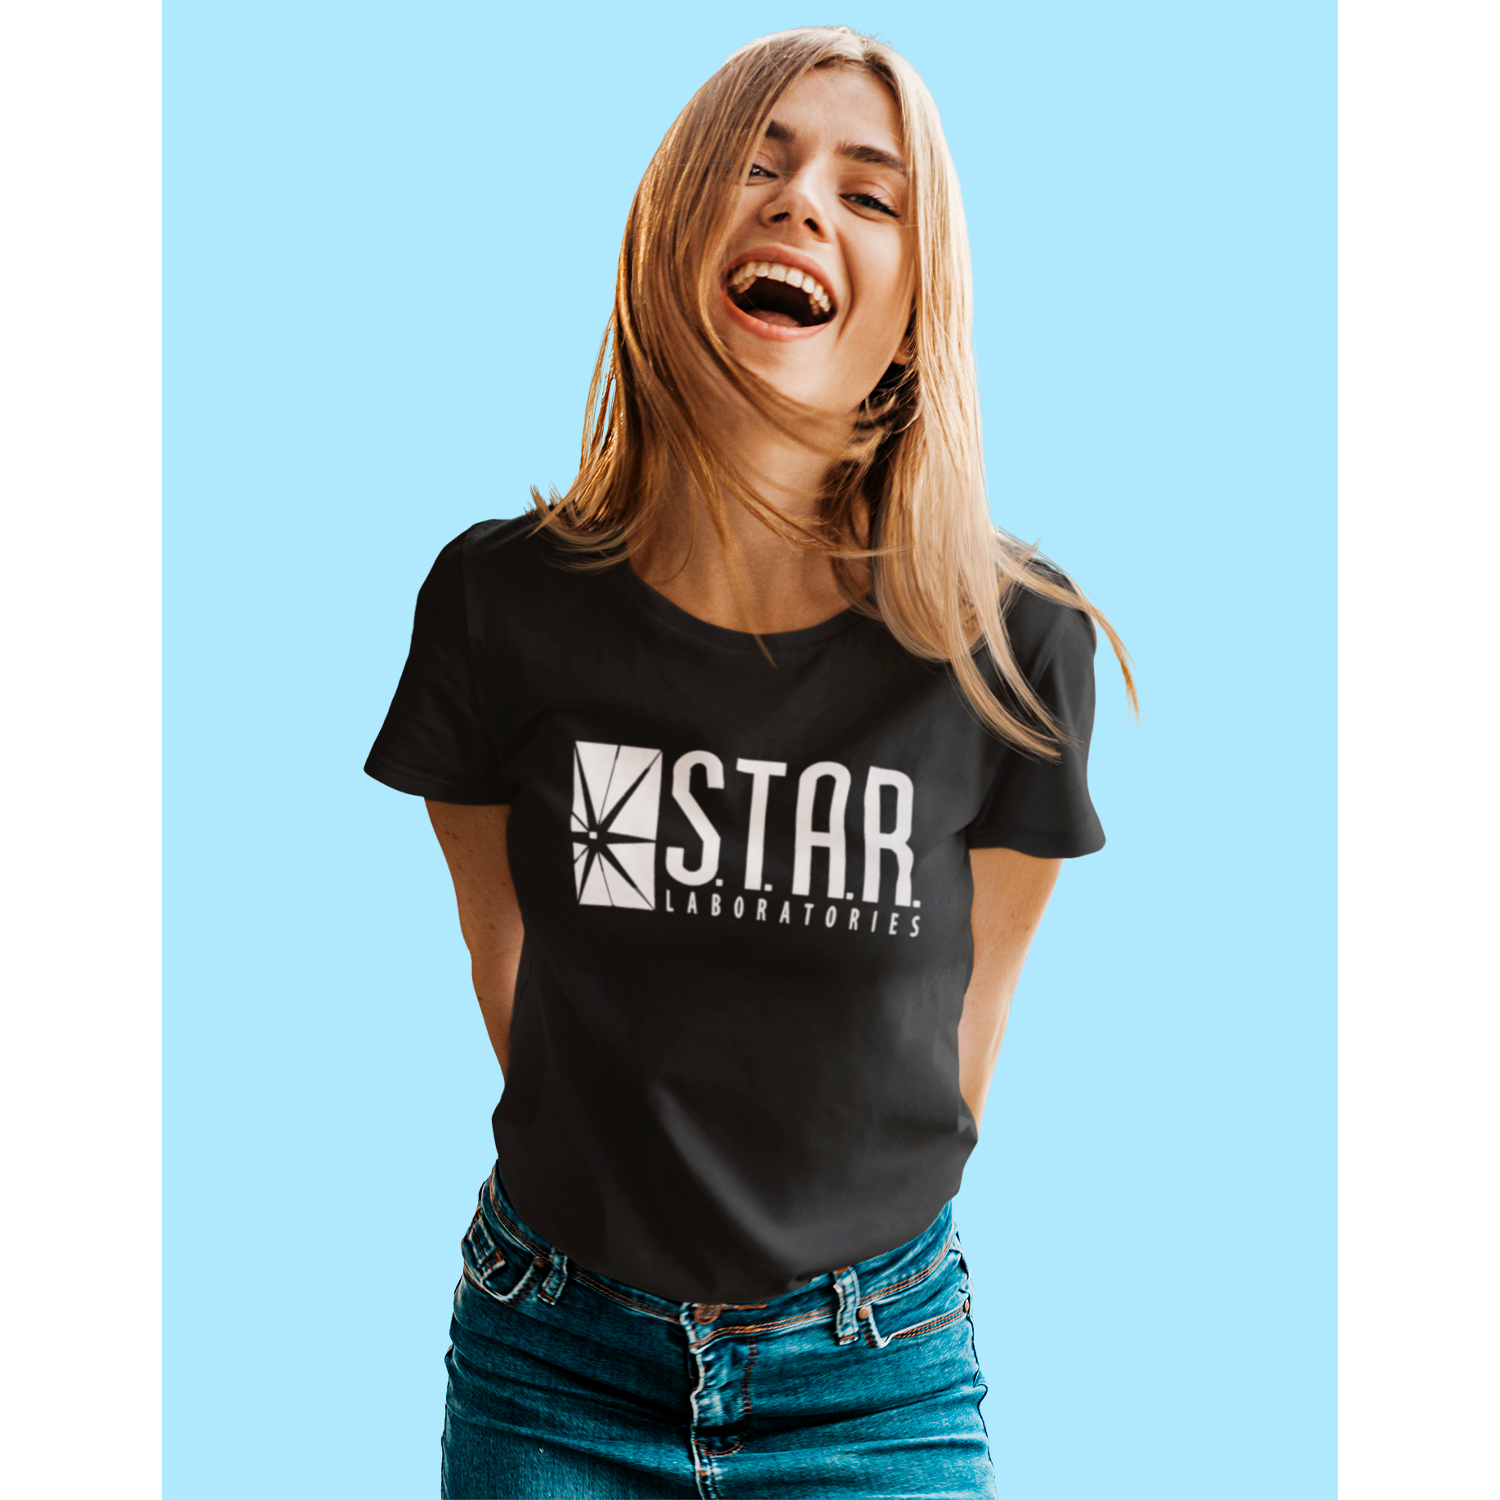 Woman wearing Retro tees black short sleeve men's unisex t-shirt featuring Star Laboratories text and logo in white